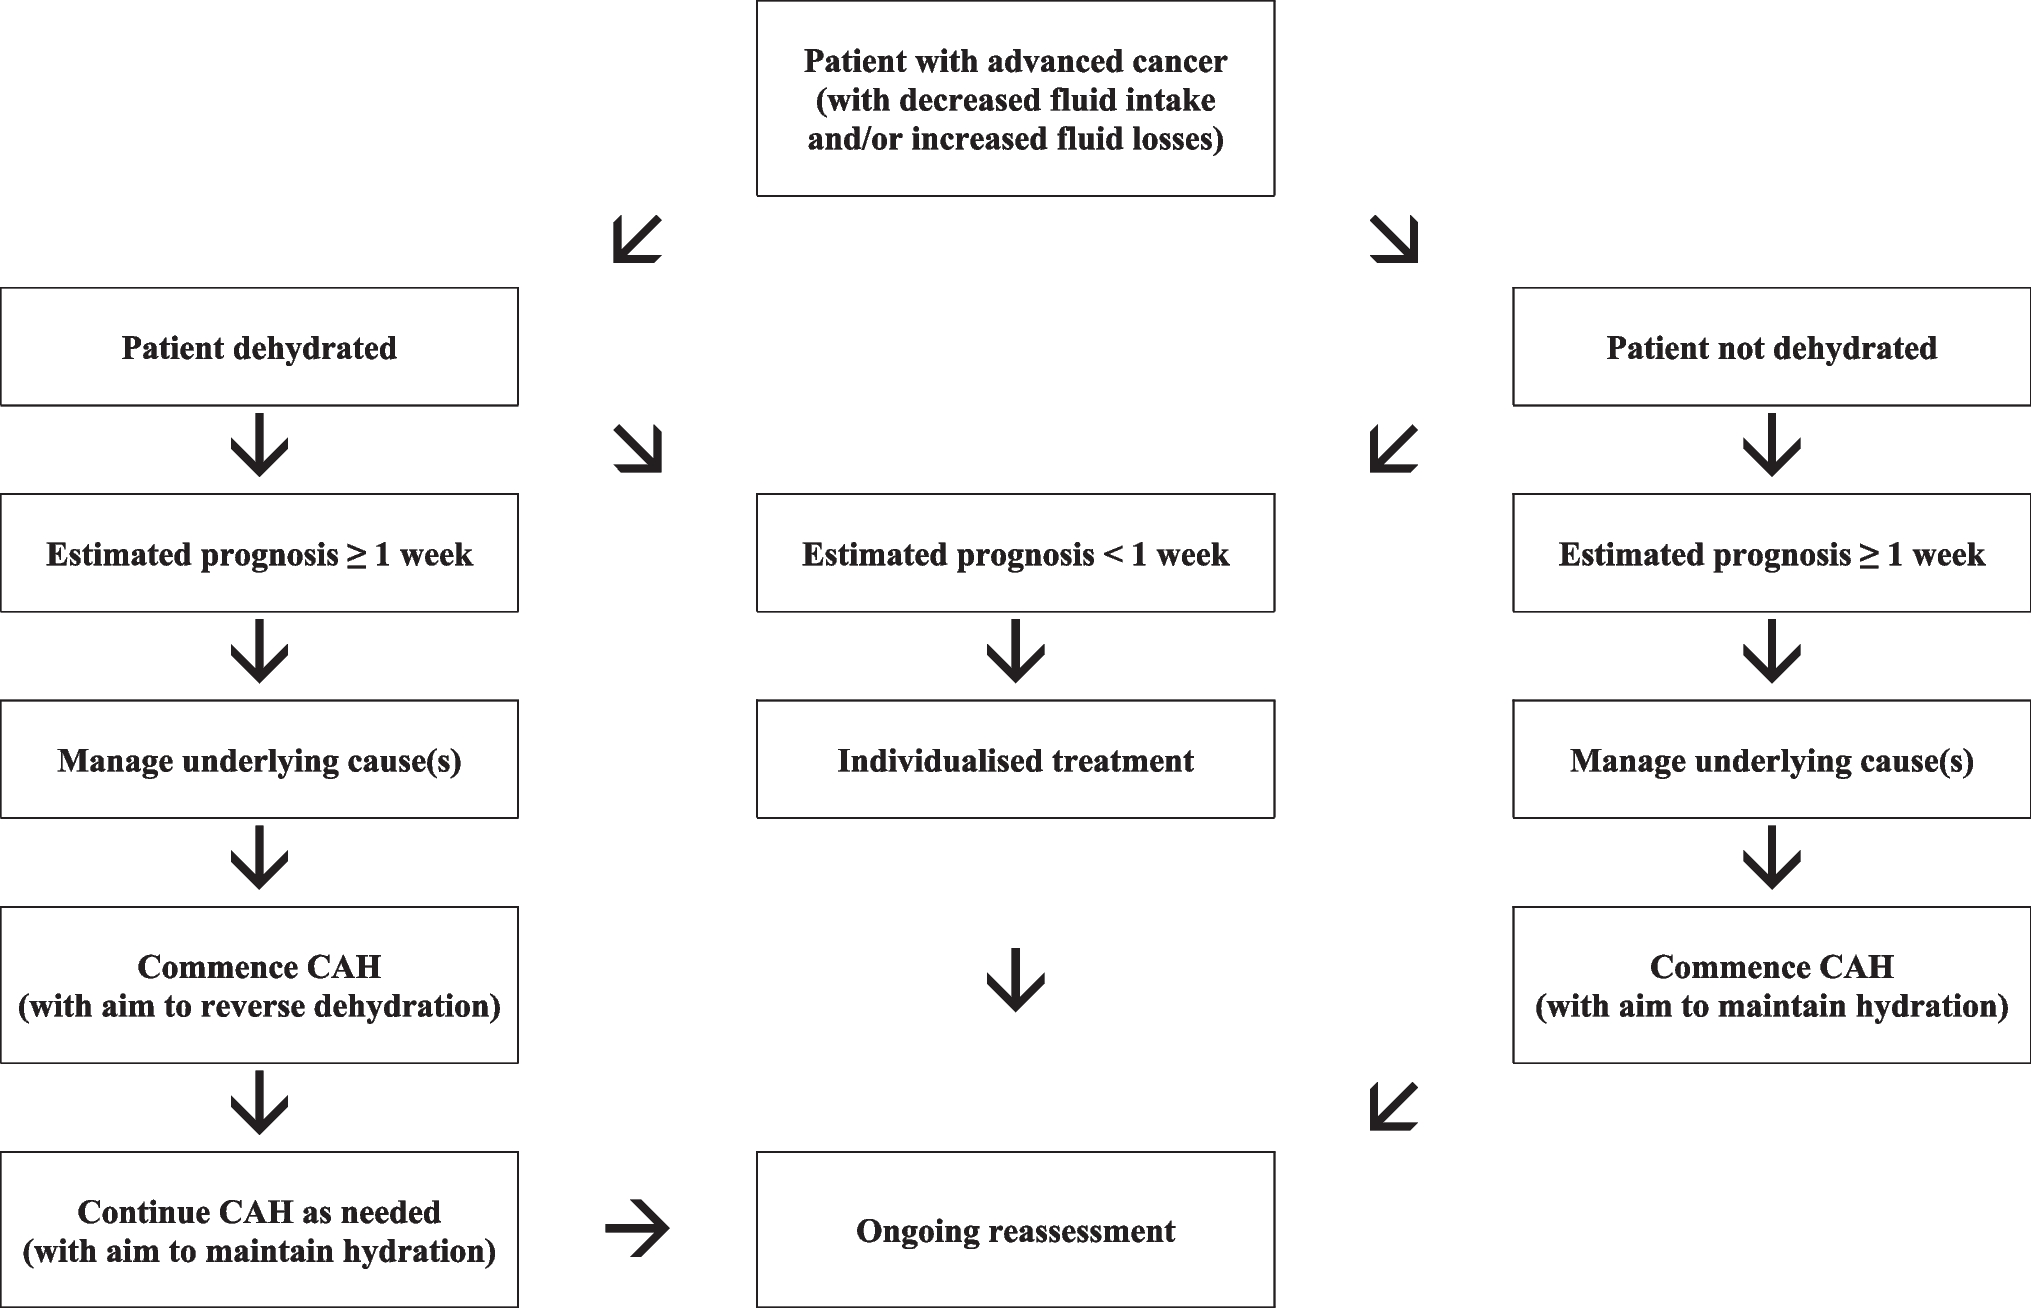 Multinational Association of Supportive Care in Cancer (MASCC) expert opinion/guidance on the use of clinically assisted hydration in patients with advanced cancer